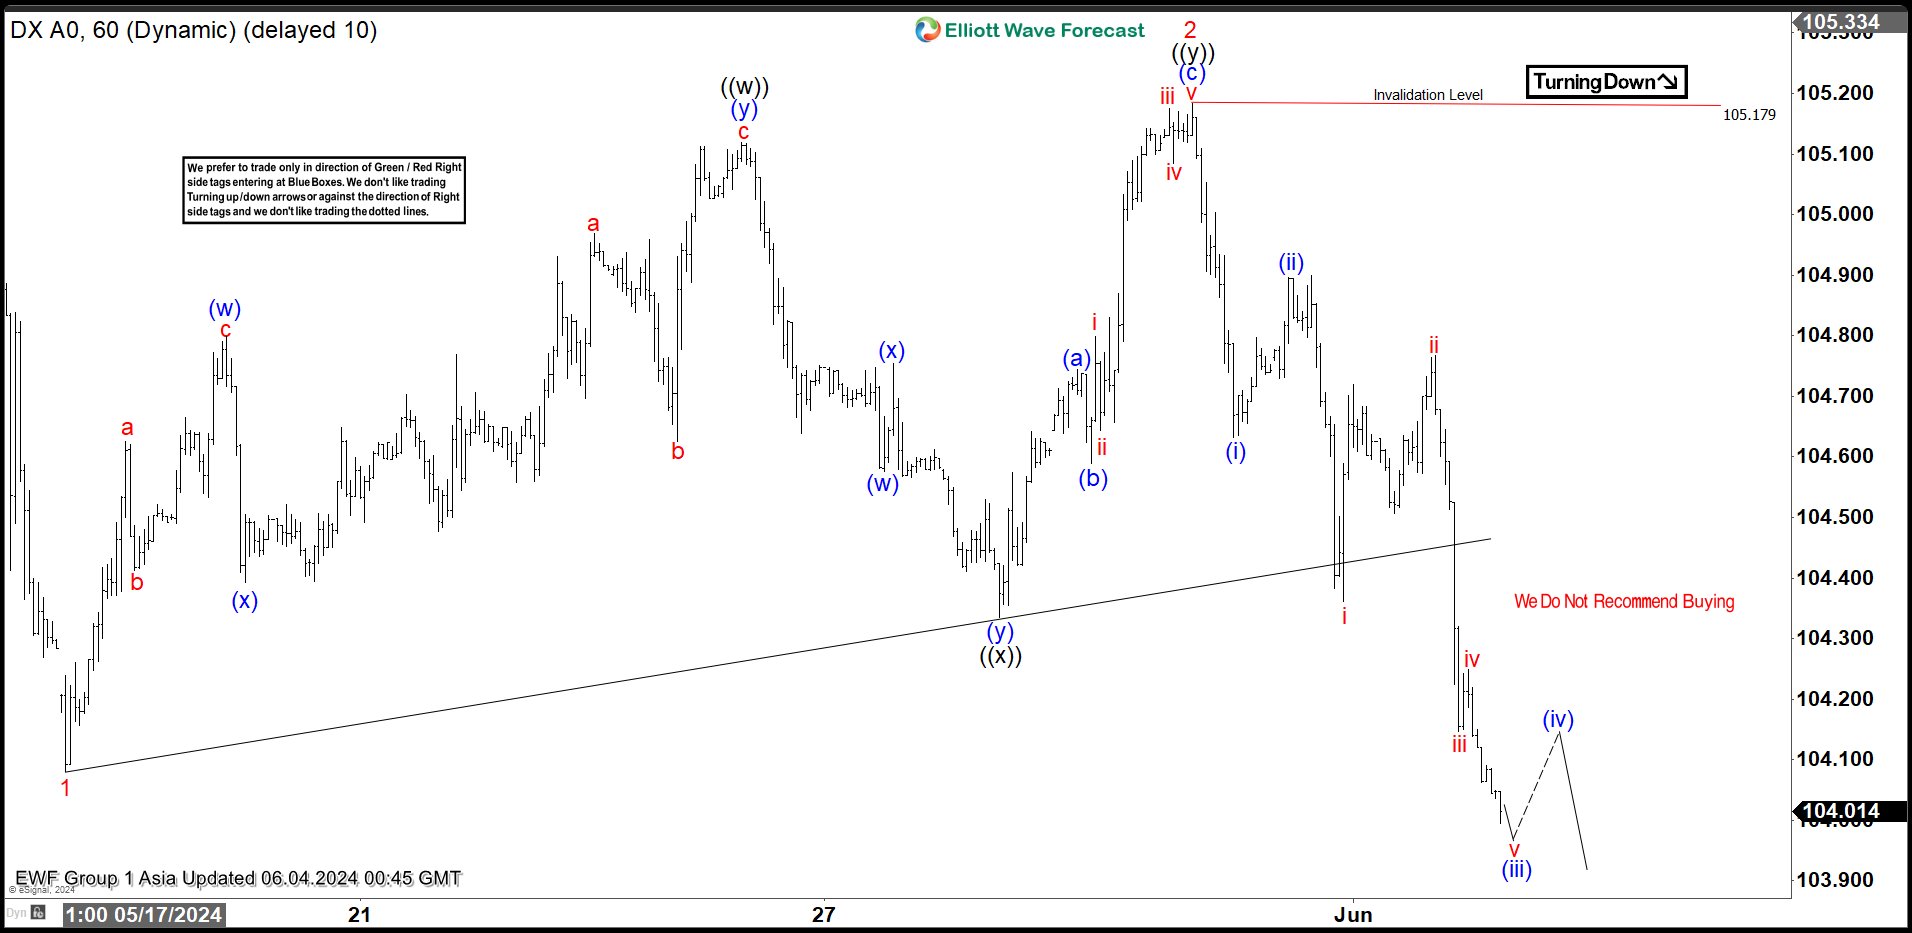 Bearish Elliott Wave Sequence in Dollar Index (DXY) Favors Downside